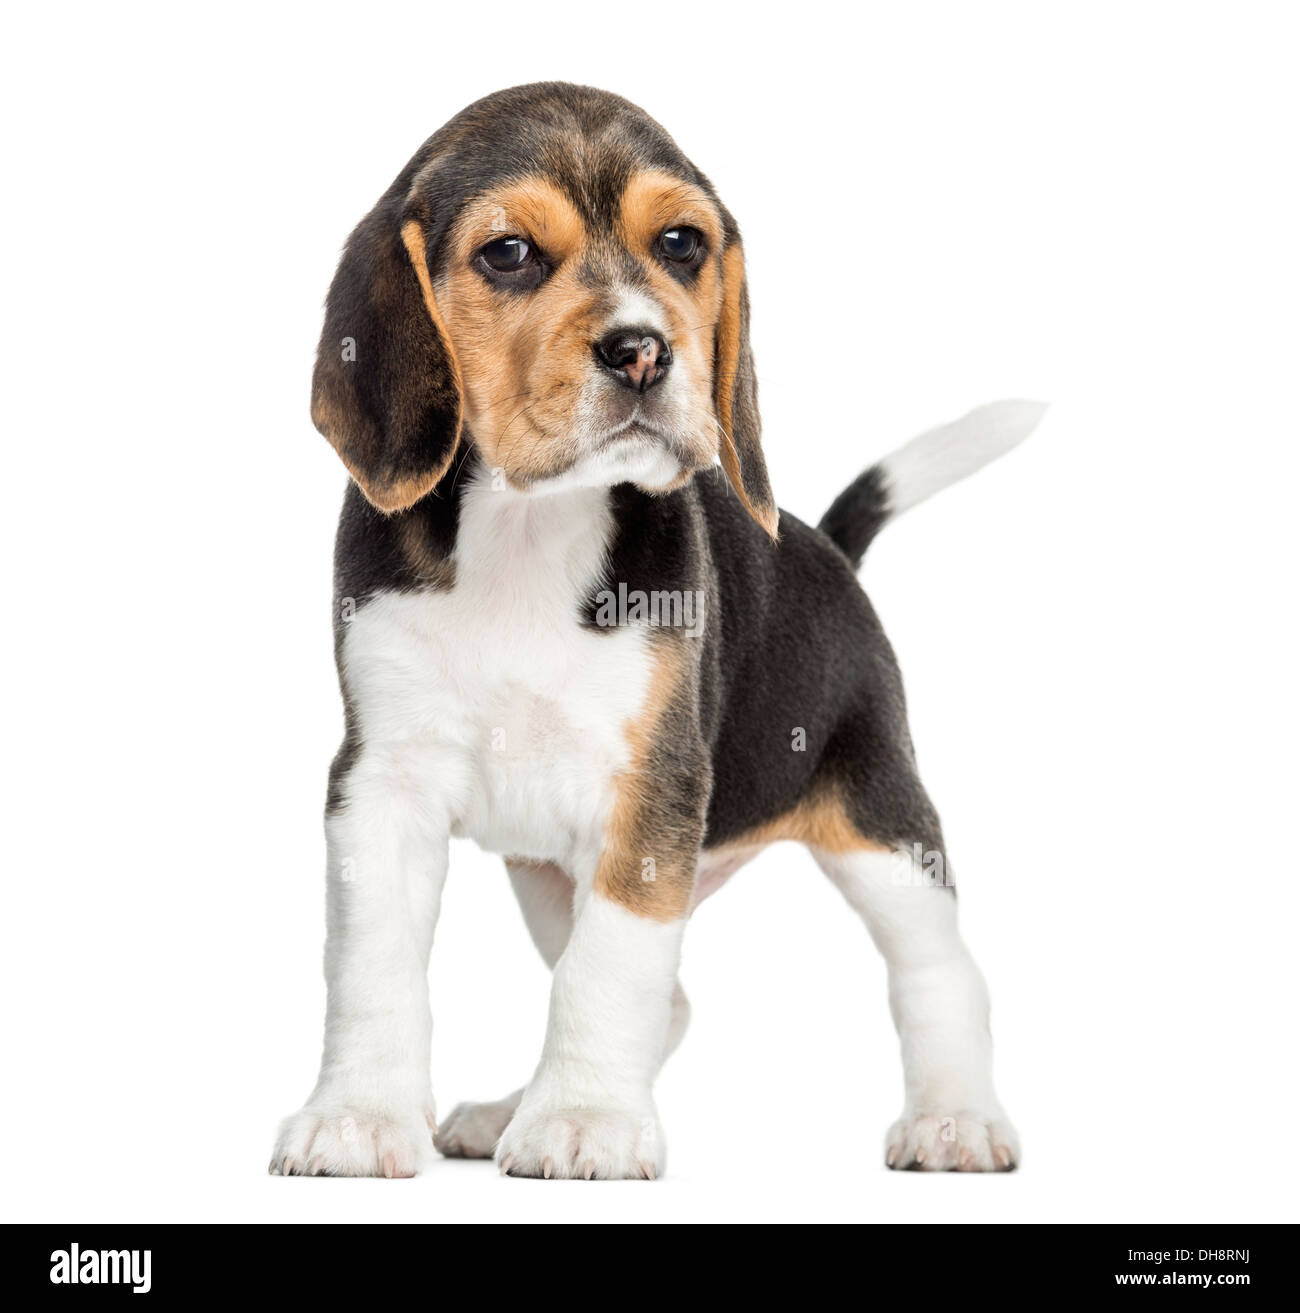 Front view of a Beagle puppy standing, looking at the camera against white background Stock Photo